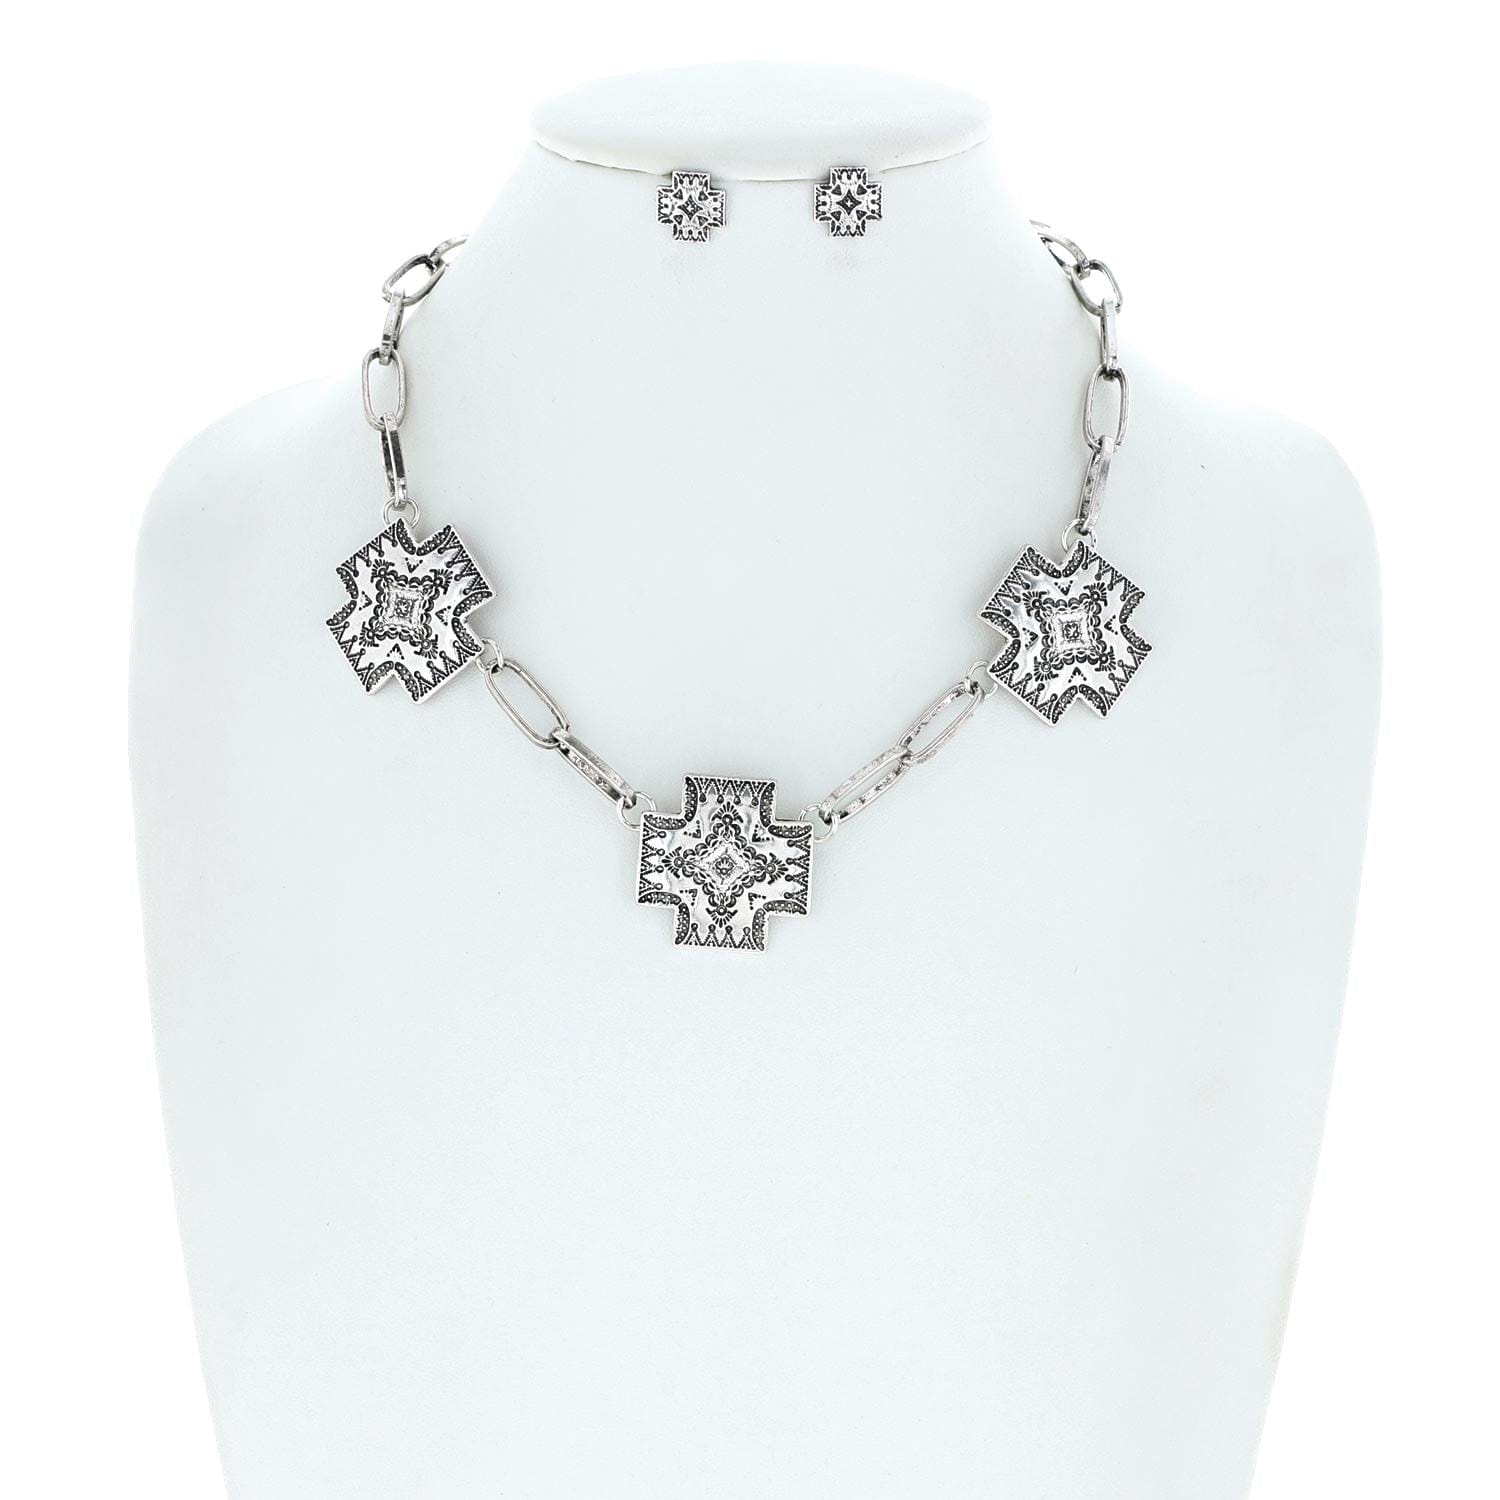 Something Special LA Jewelry - Necklaces Western Cross Chain Link Necklace And Earring Set